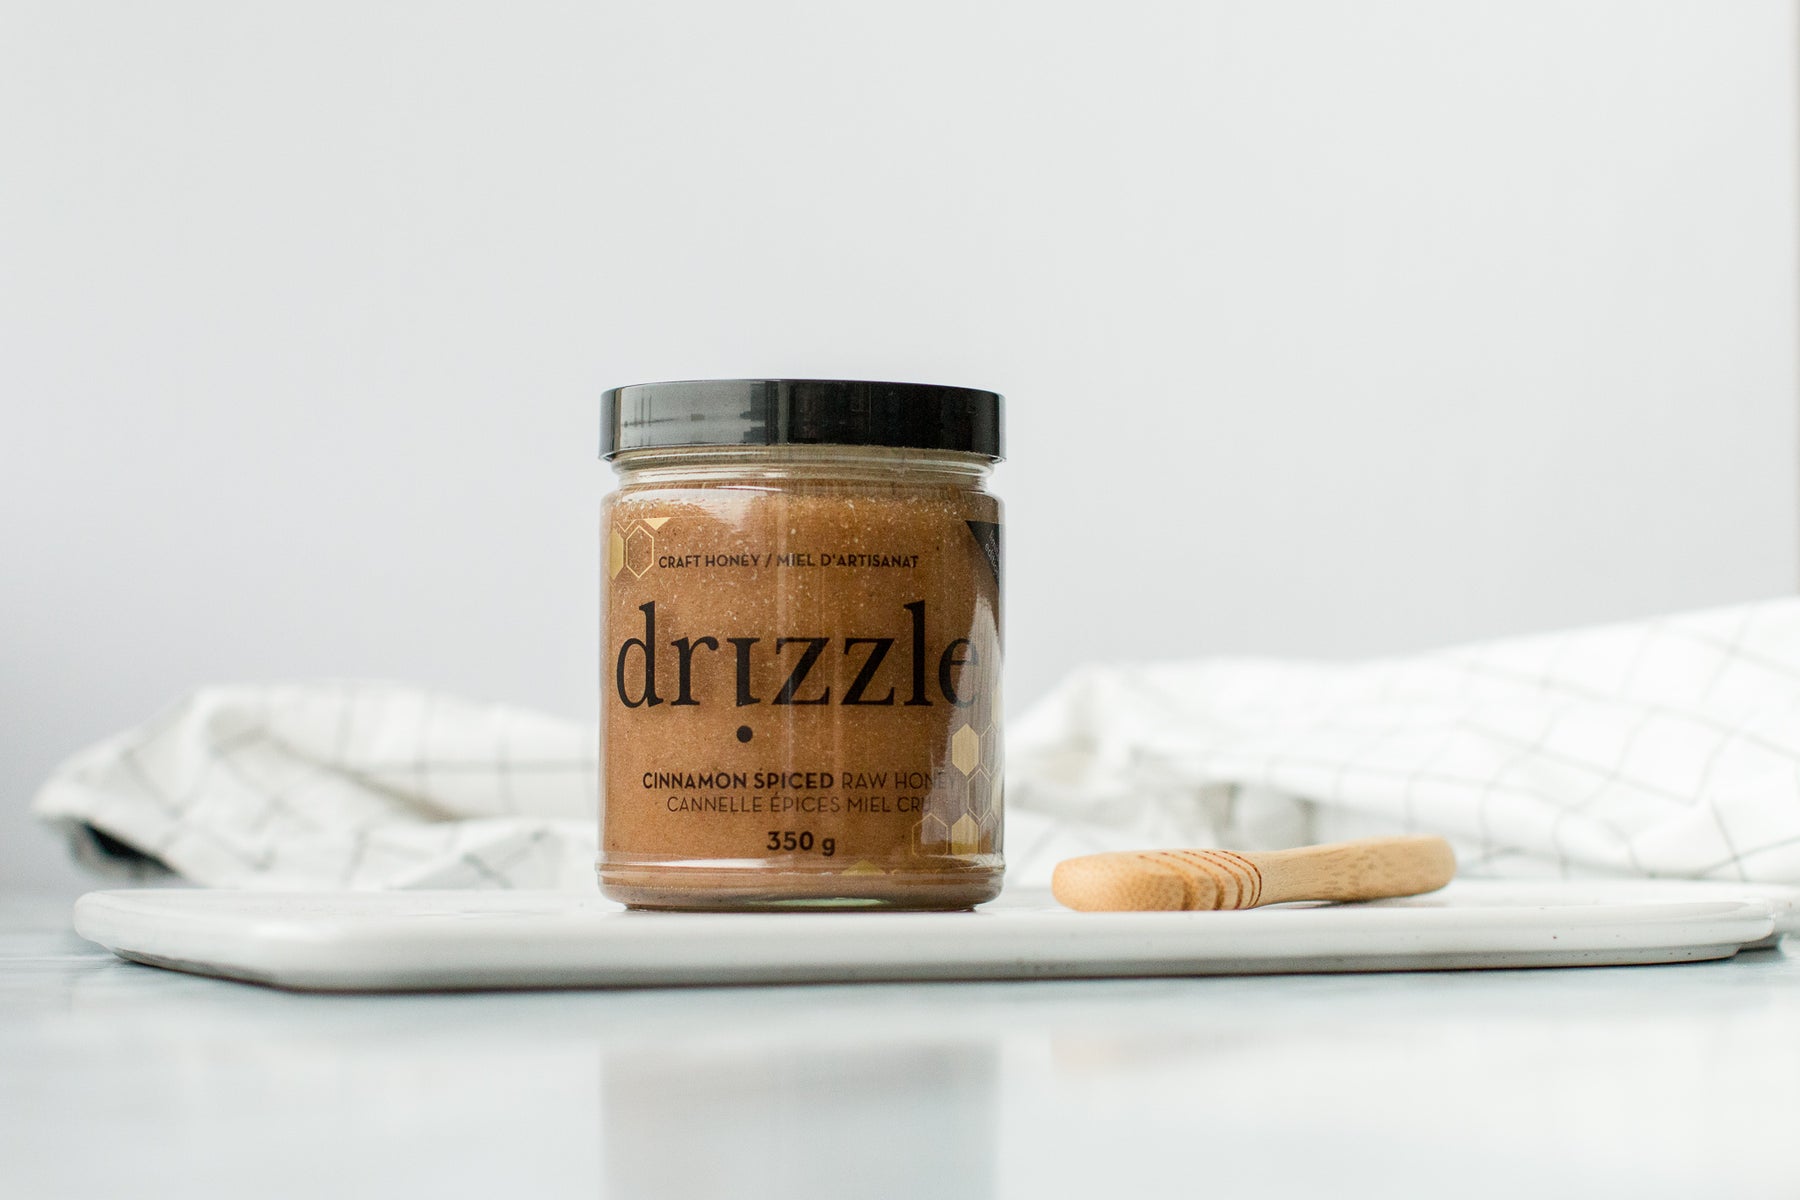 Drizzle Cinnamon Spiced Raw Honey in a white kitchen setting next to a drizzle spoon.